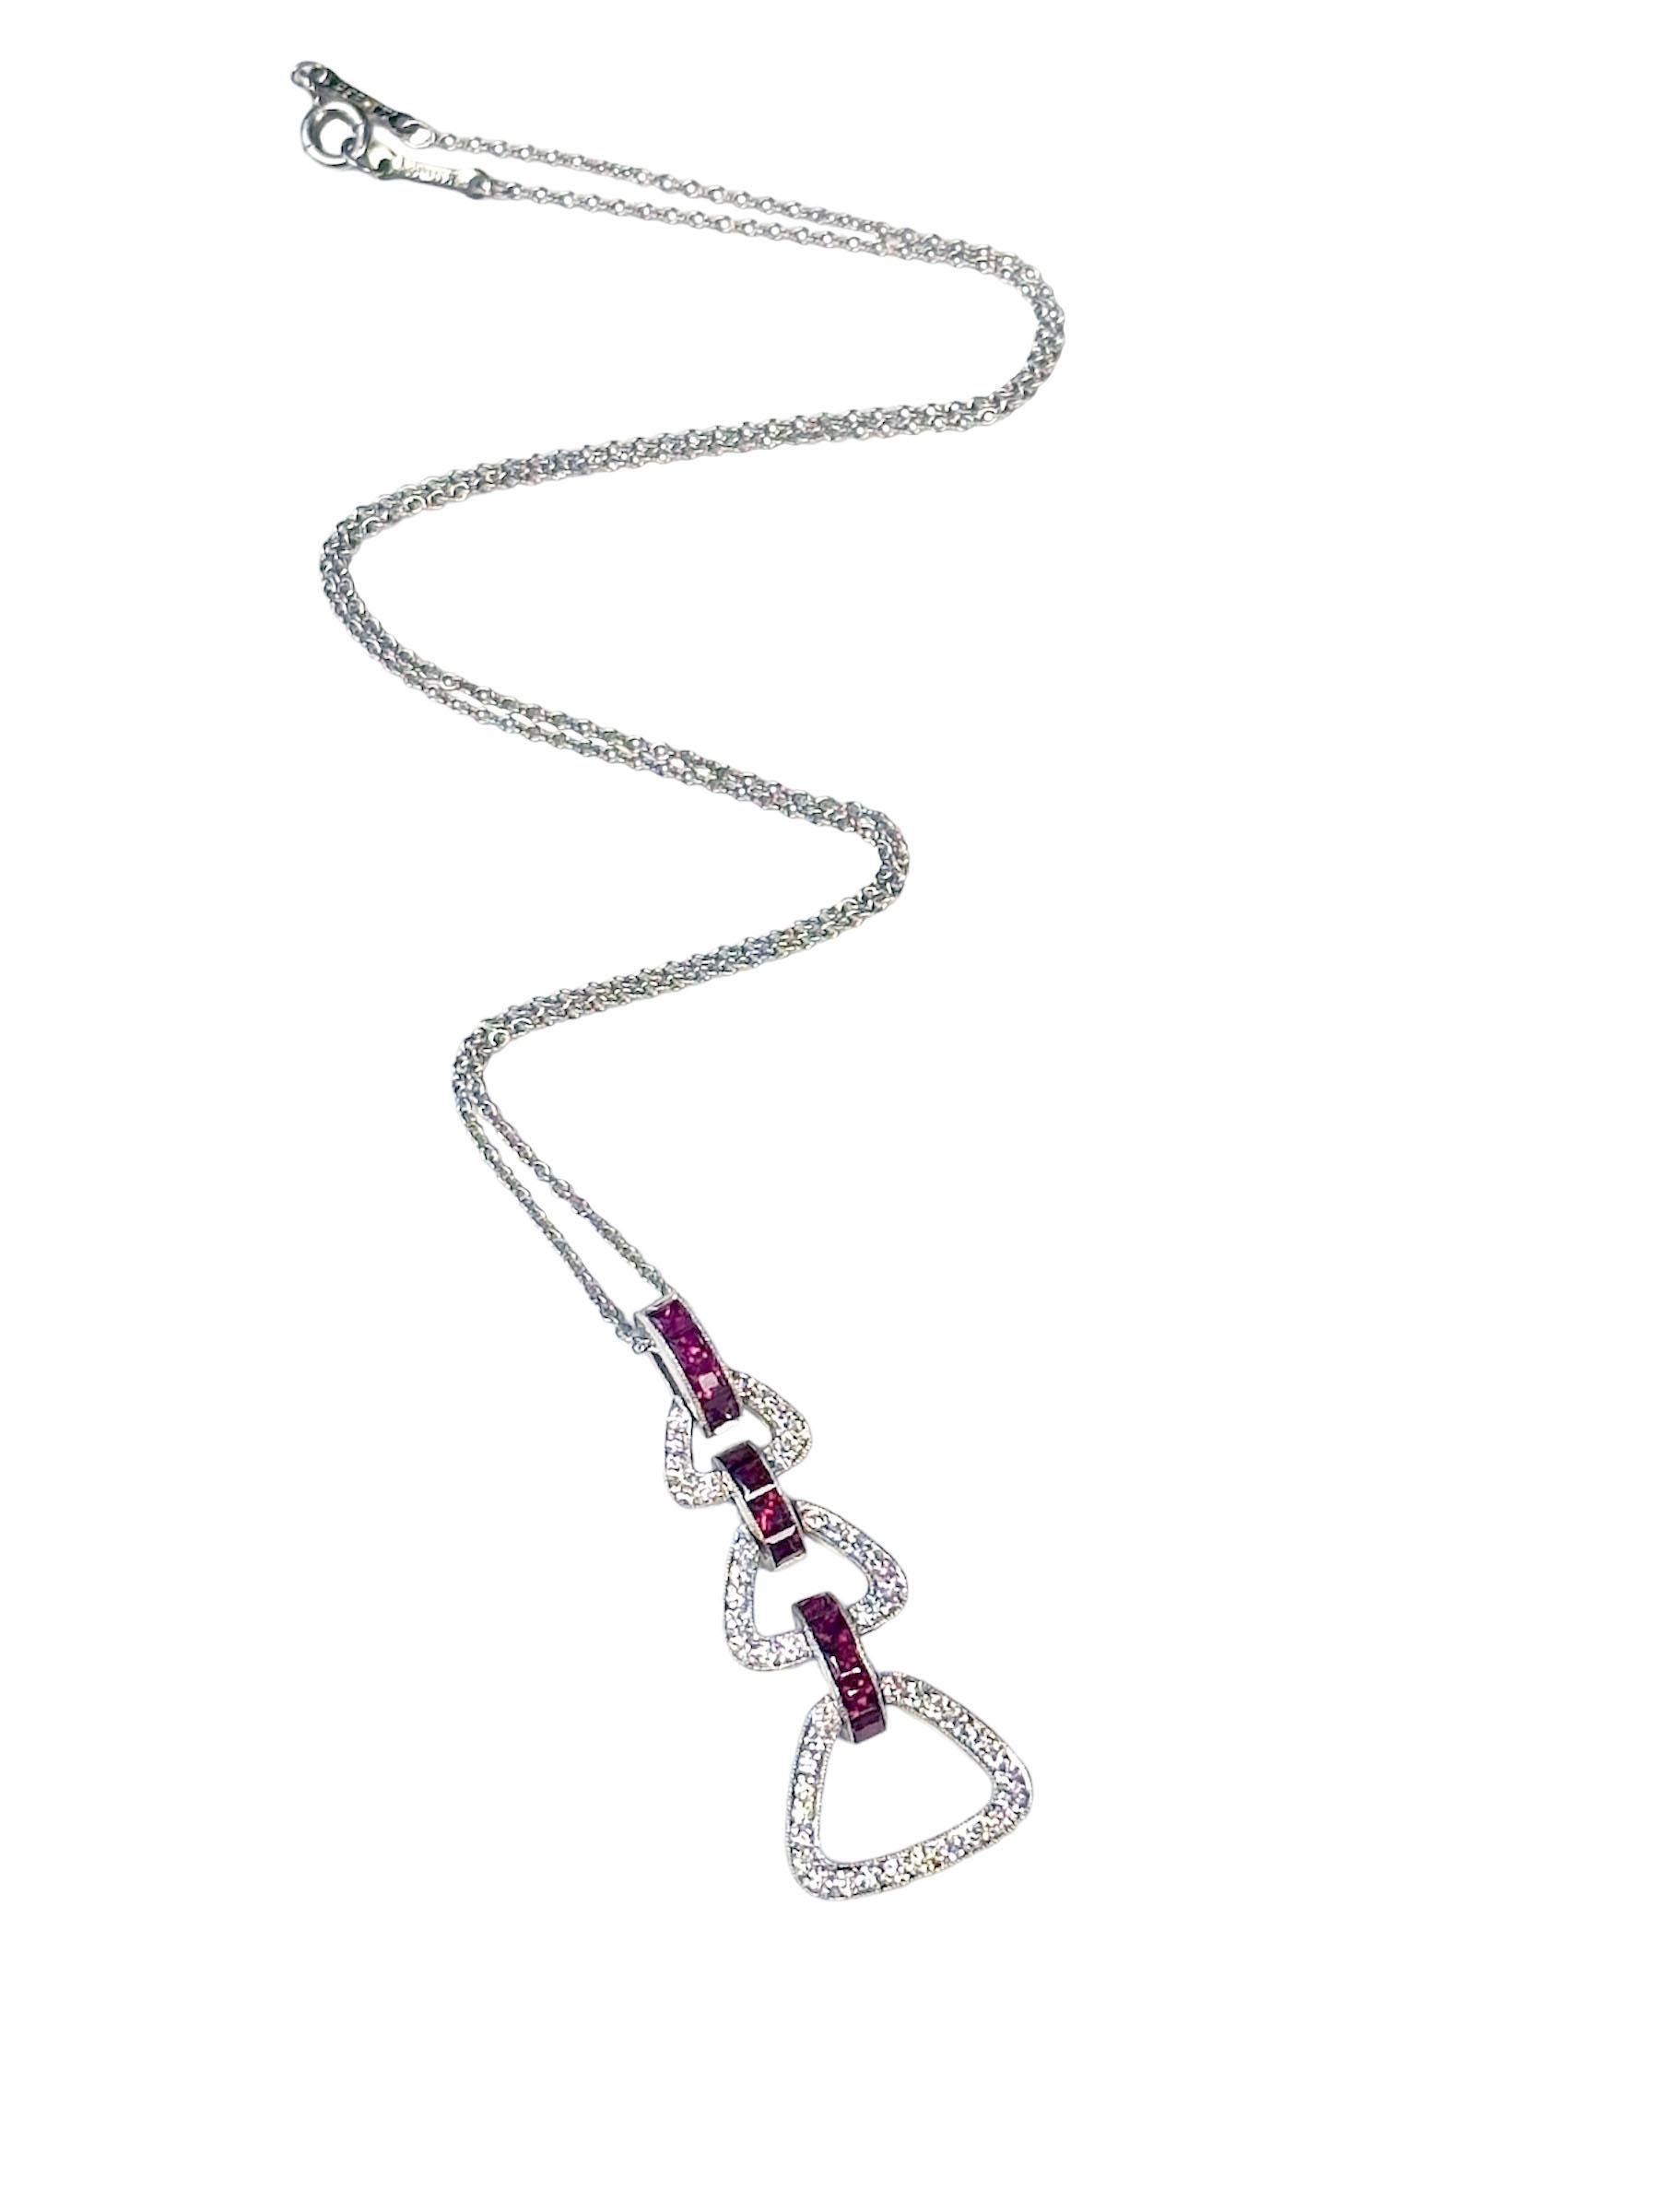 Tiffany & Company Art Deco Style Platinum Diamond Ruby Pendant Necklace  In Excellent Condition For Sale In Chicago, IL